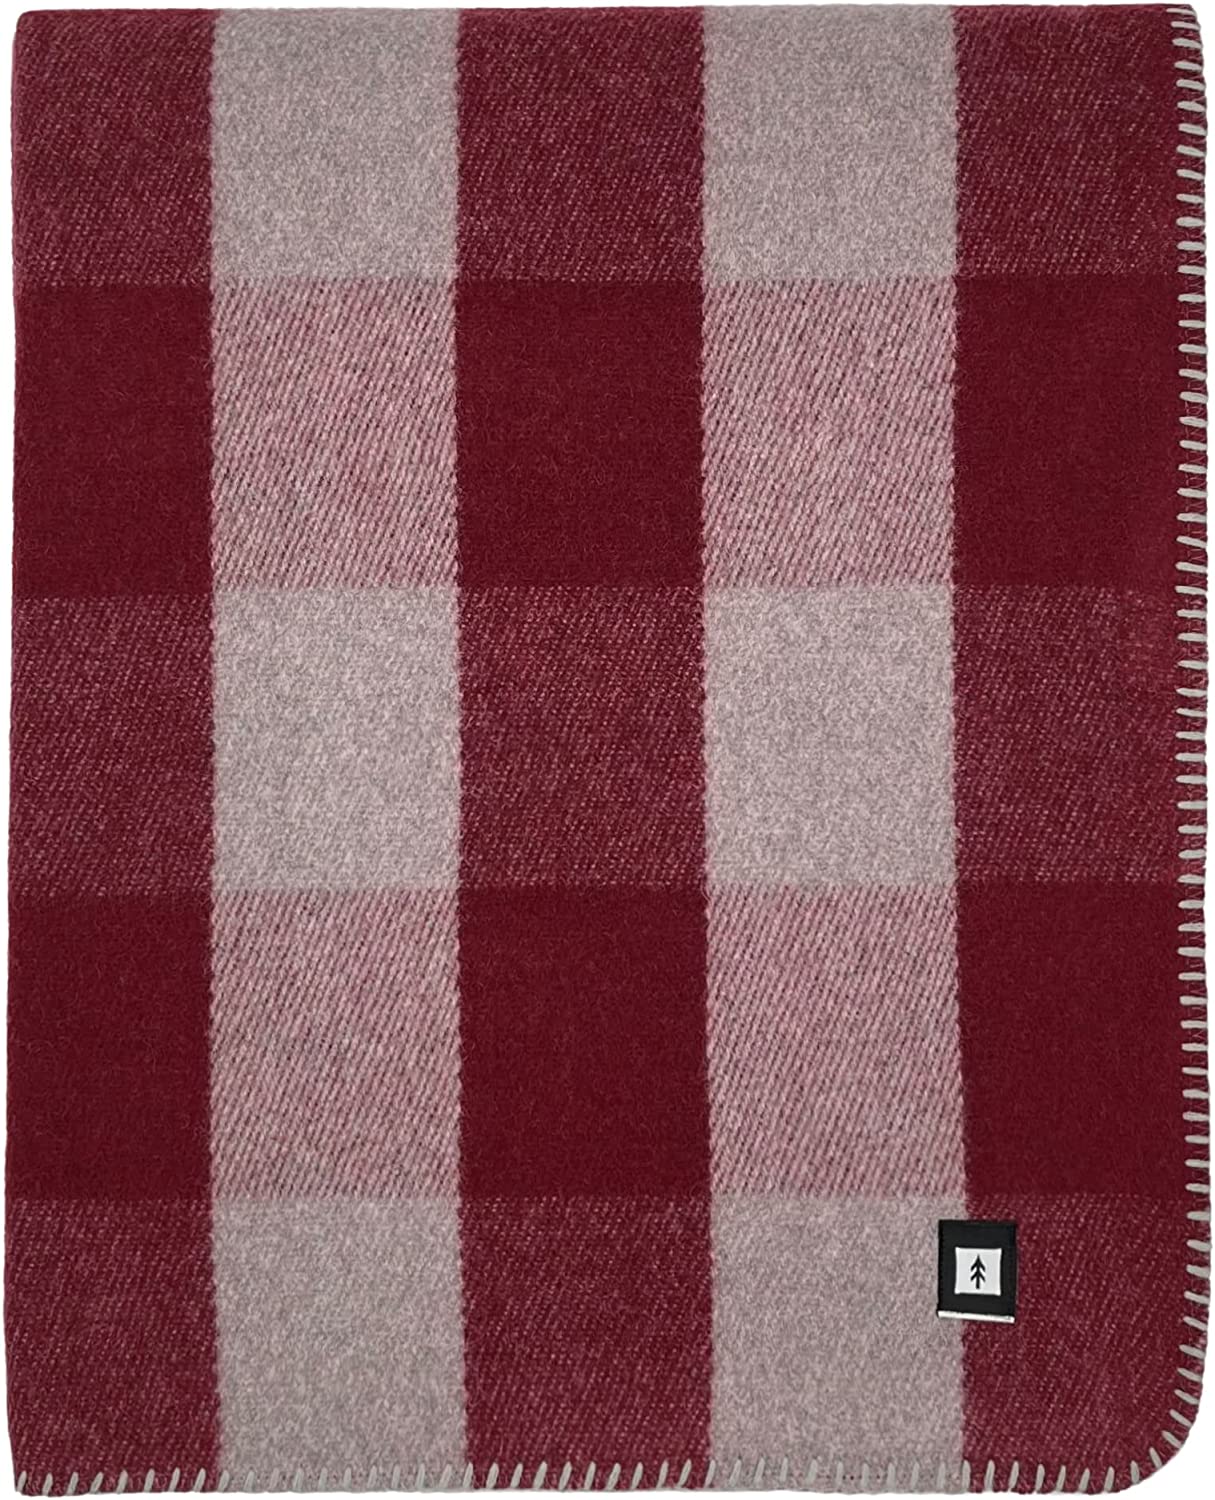 EKTOS 90% Wool Checkered Blanket, 4.5 lbs, Warm, Thick, Washable, Large 66" x 90" Buffalo Plaid | Perfect for Home, Cabin, RV, Camping, Outdoor Adventures & Sporting Events (Maroon)